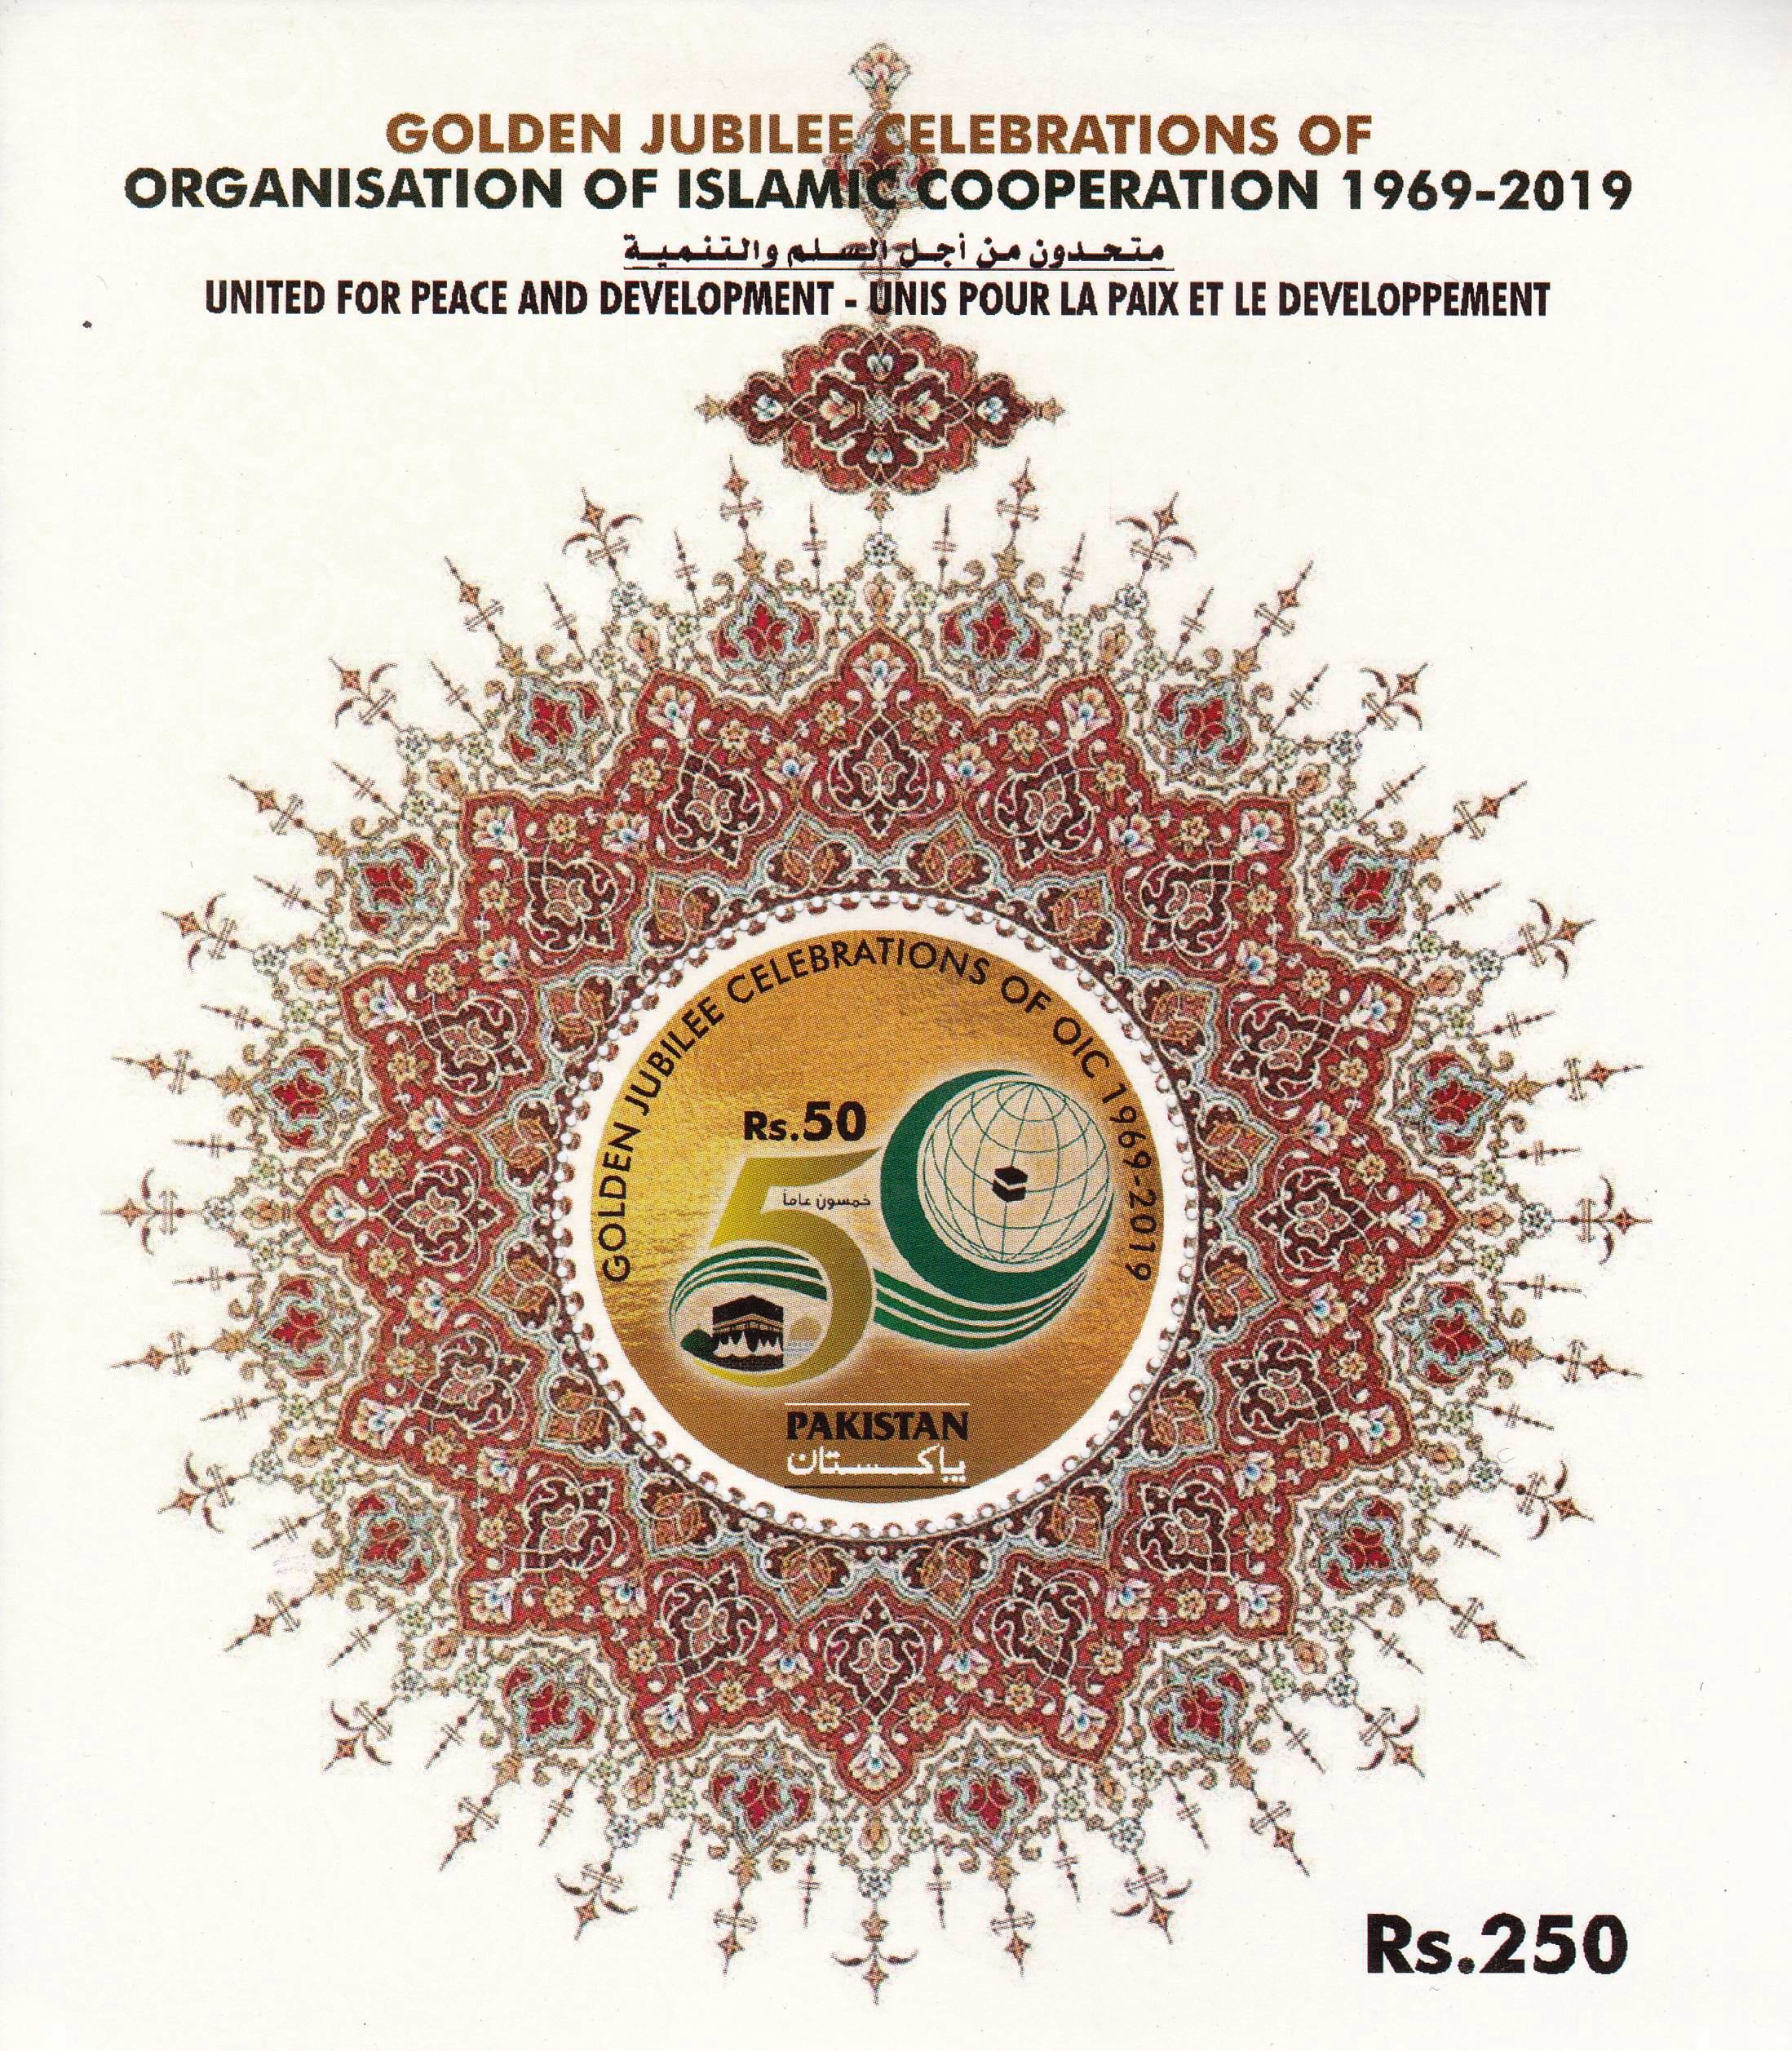 Pakistan Stamps 2001 Year Of The Quaid-e-Azam - Click Image to Close